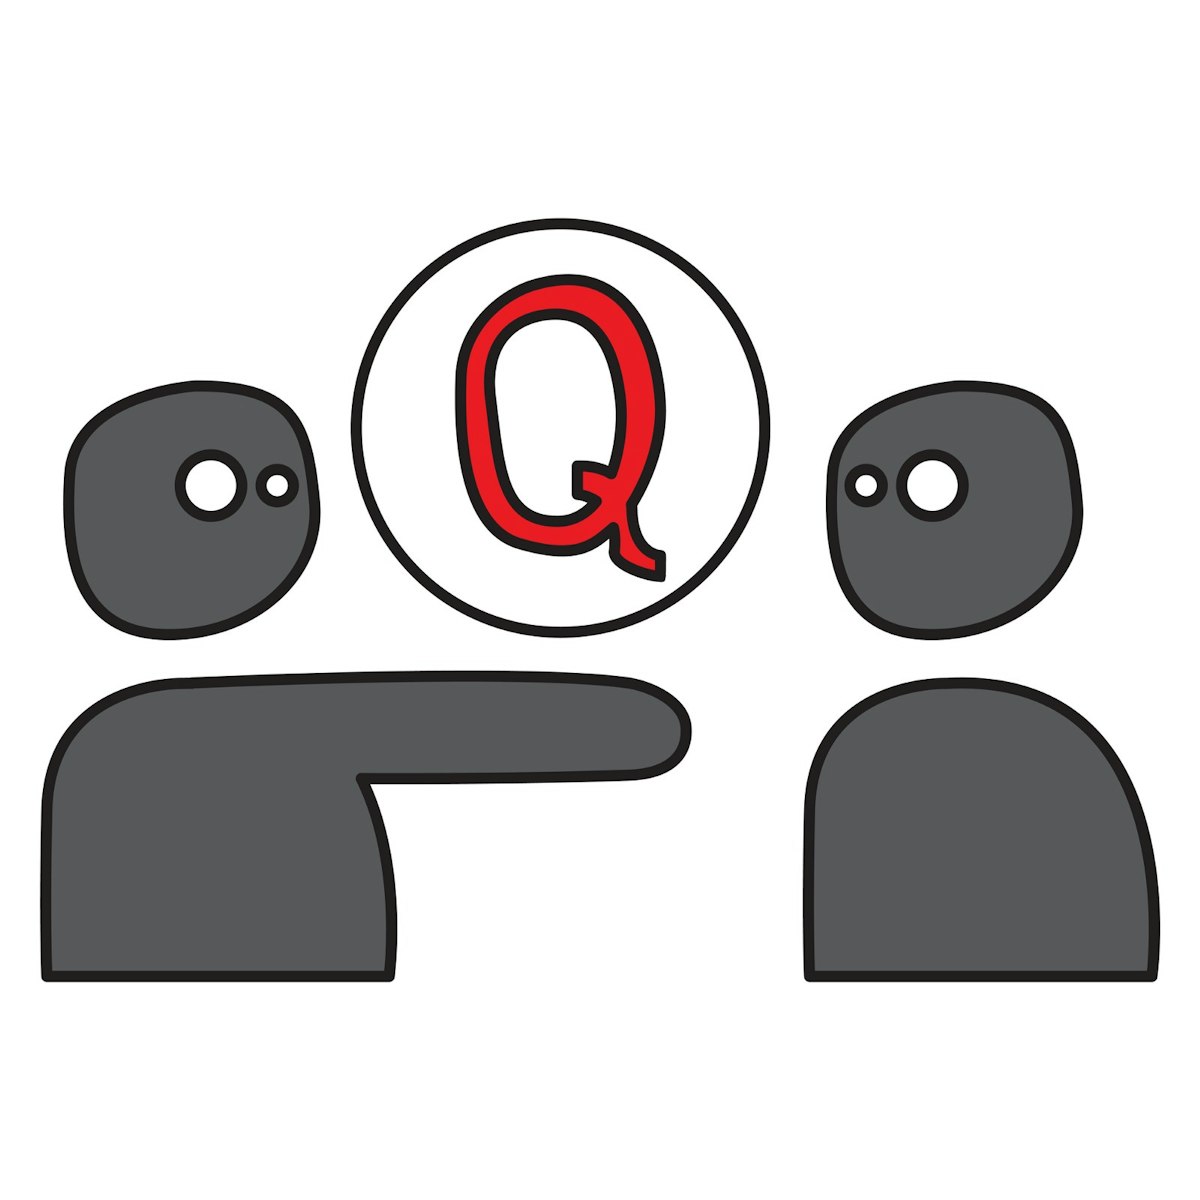 featured image - What’s The Business Of Quora? It’s About Asking The Right Question